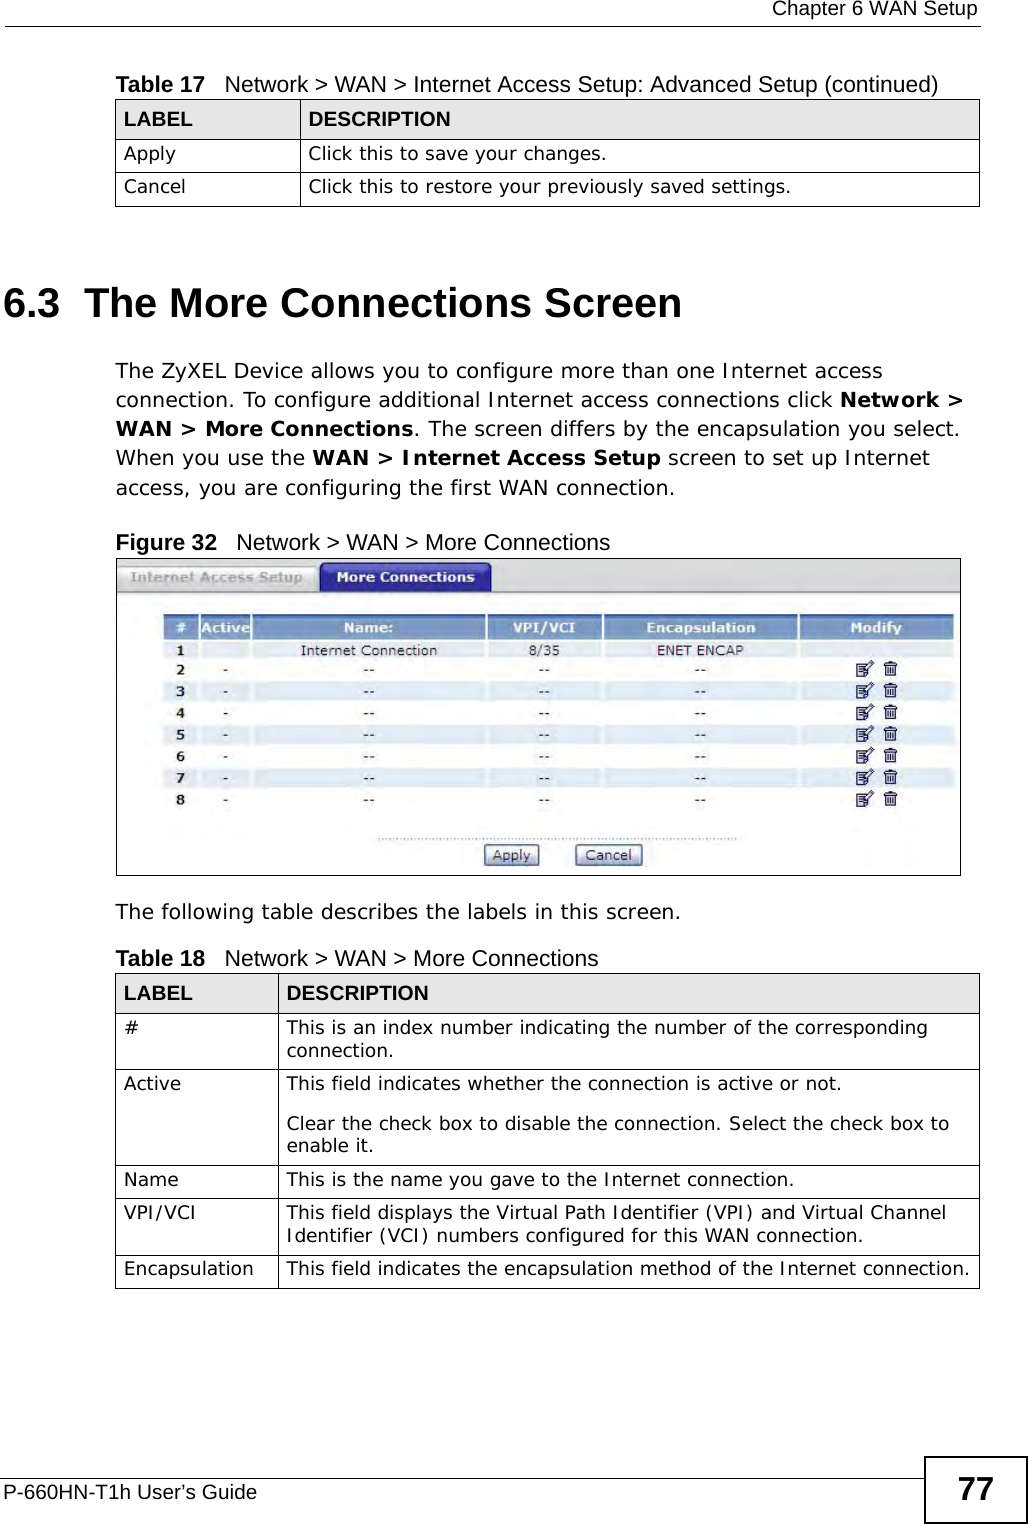  Chapter 6 WAN SetupP-660HN-T1h User’s Guide 776.3  The More Connections ScreenThe ZyXEL Device allows you to configure more than one Internet access connection. To configure additional Internet access connections click Network &gt; WAN &gt; More Connections. The screen differs by the encapsulation you select. When you use the WAN &gt; Internet Access Setup screen to set up Internet access, you are configuring the first WAN connection.Figure 32   Network &gt; WAN &gt; More ConnectionsThe following table describes the labels in this screen.  Apply Click this to save your changes. Cancel Click this to restore your previously saved settings.Table 17   Network &gt; WAN &gt; Internet Access Setup: Advanced Setup (continued)LABEL DESCRIPTIONTable 18   Network &gt; WAN &gt; More ConnectionsLABEL DESCRIPTION# This is an index number indicating the number of the corresponding connection.Active This field indicates whether the connection is active or not.Clear the check box to disable the connection. Select the check box to enable it.Name This is the name you gave to the Internet connection.VPI/VCI This field displays the Virtual Path Identifier (VPI) and Virtual Channel Identifier (VCI) numbers configured for this WAN connection. Encapsulation This field indicates the encapsulation method of the Internet connection.